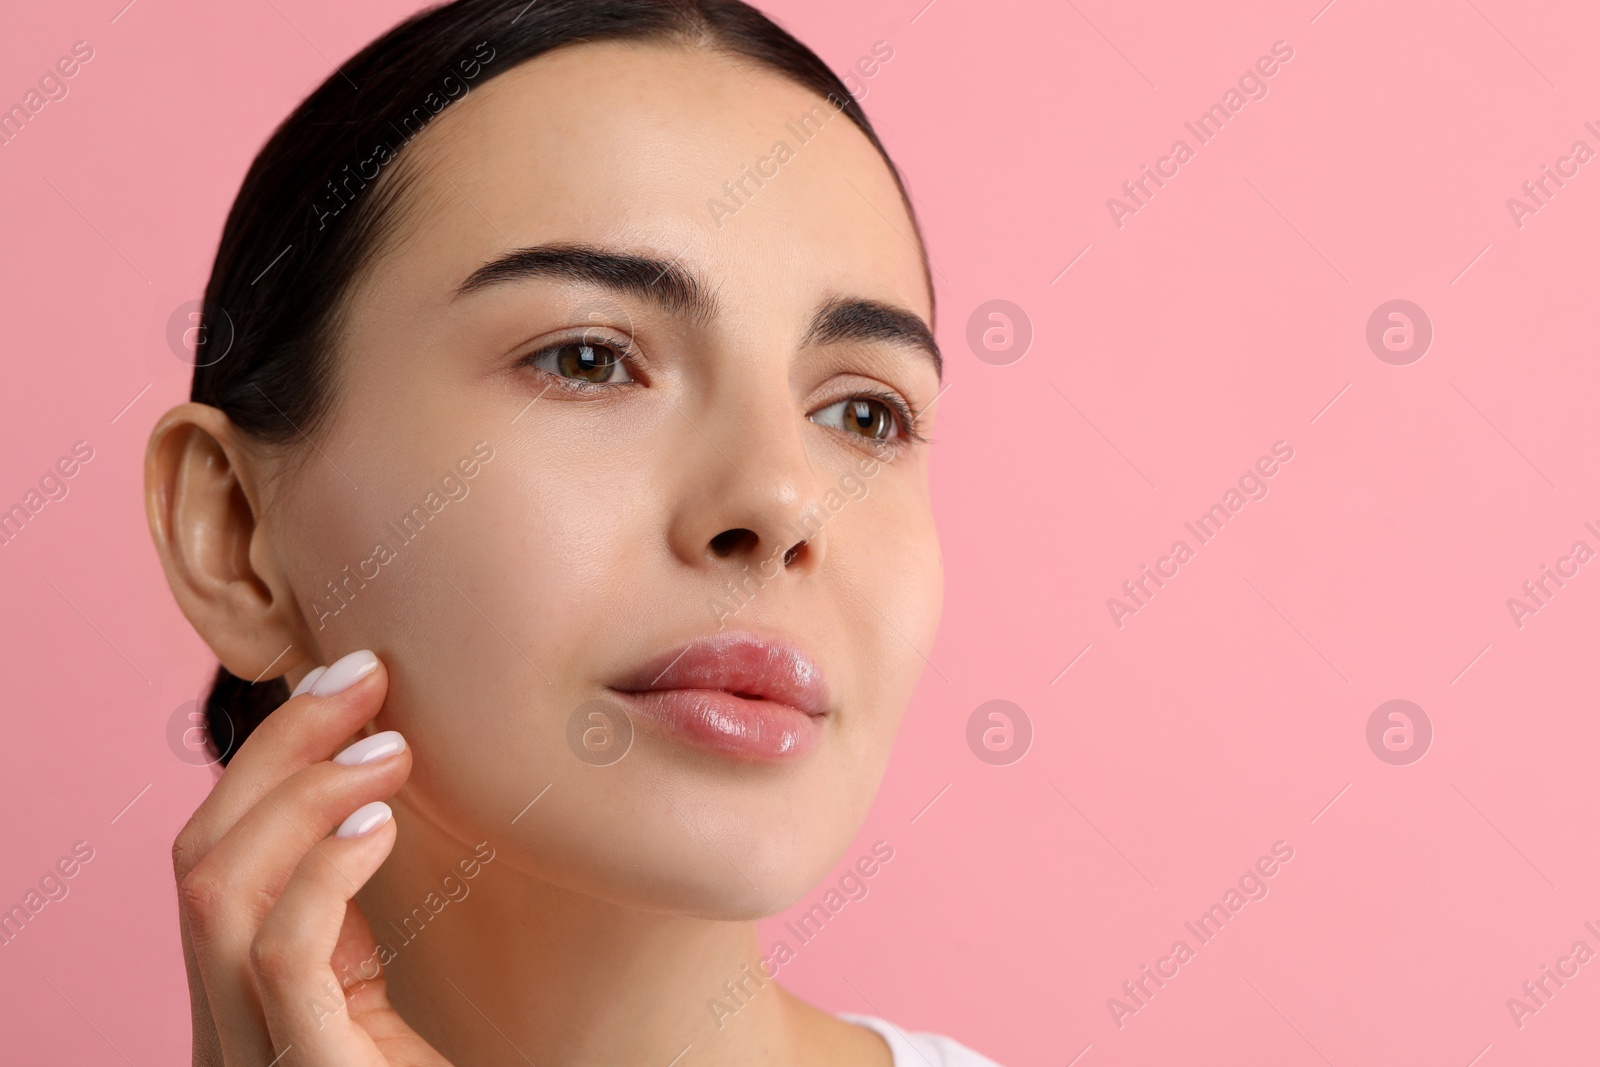 Photo of Woman with dry skin checking her face on pink background, space for text